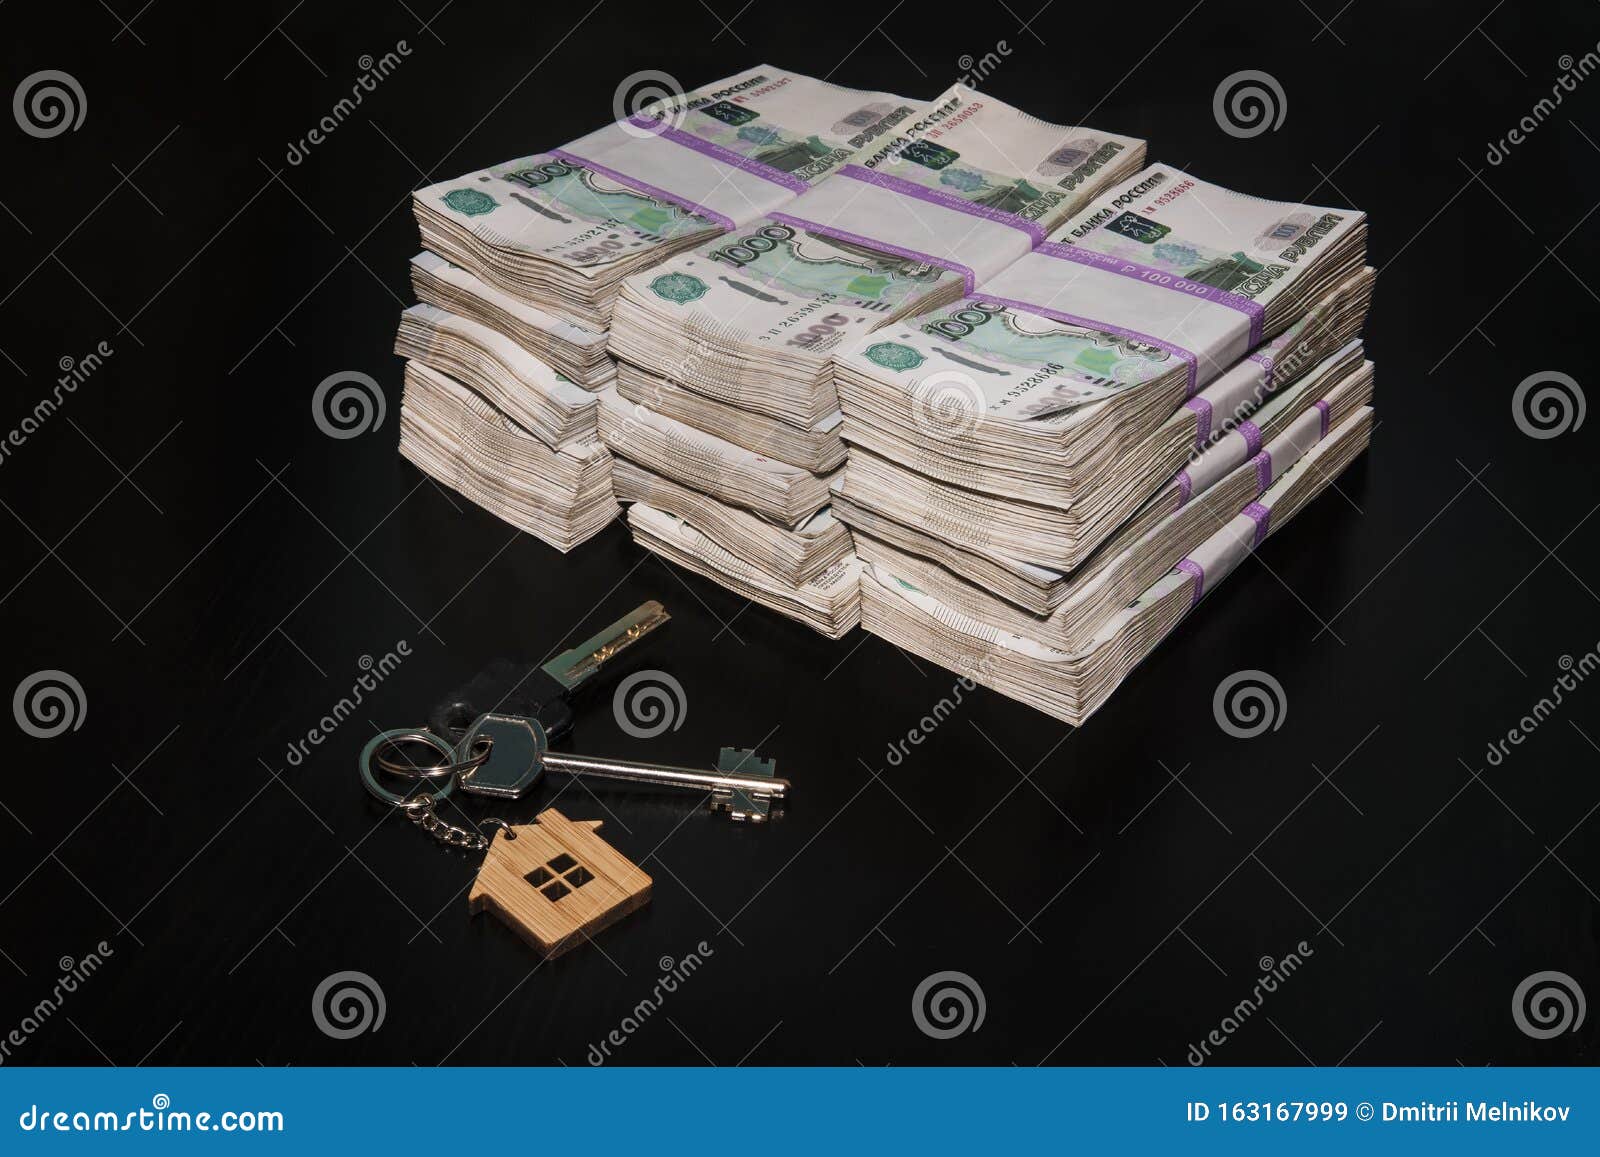 A Bundle Of Five Thousand Notes With Keys To An Apartment Or House On A White Background Buying Real Estate For Russian Money Stock Image Image Of Home Bill